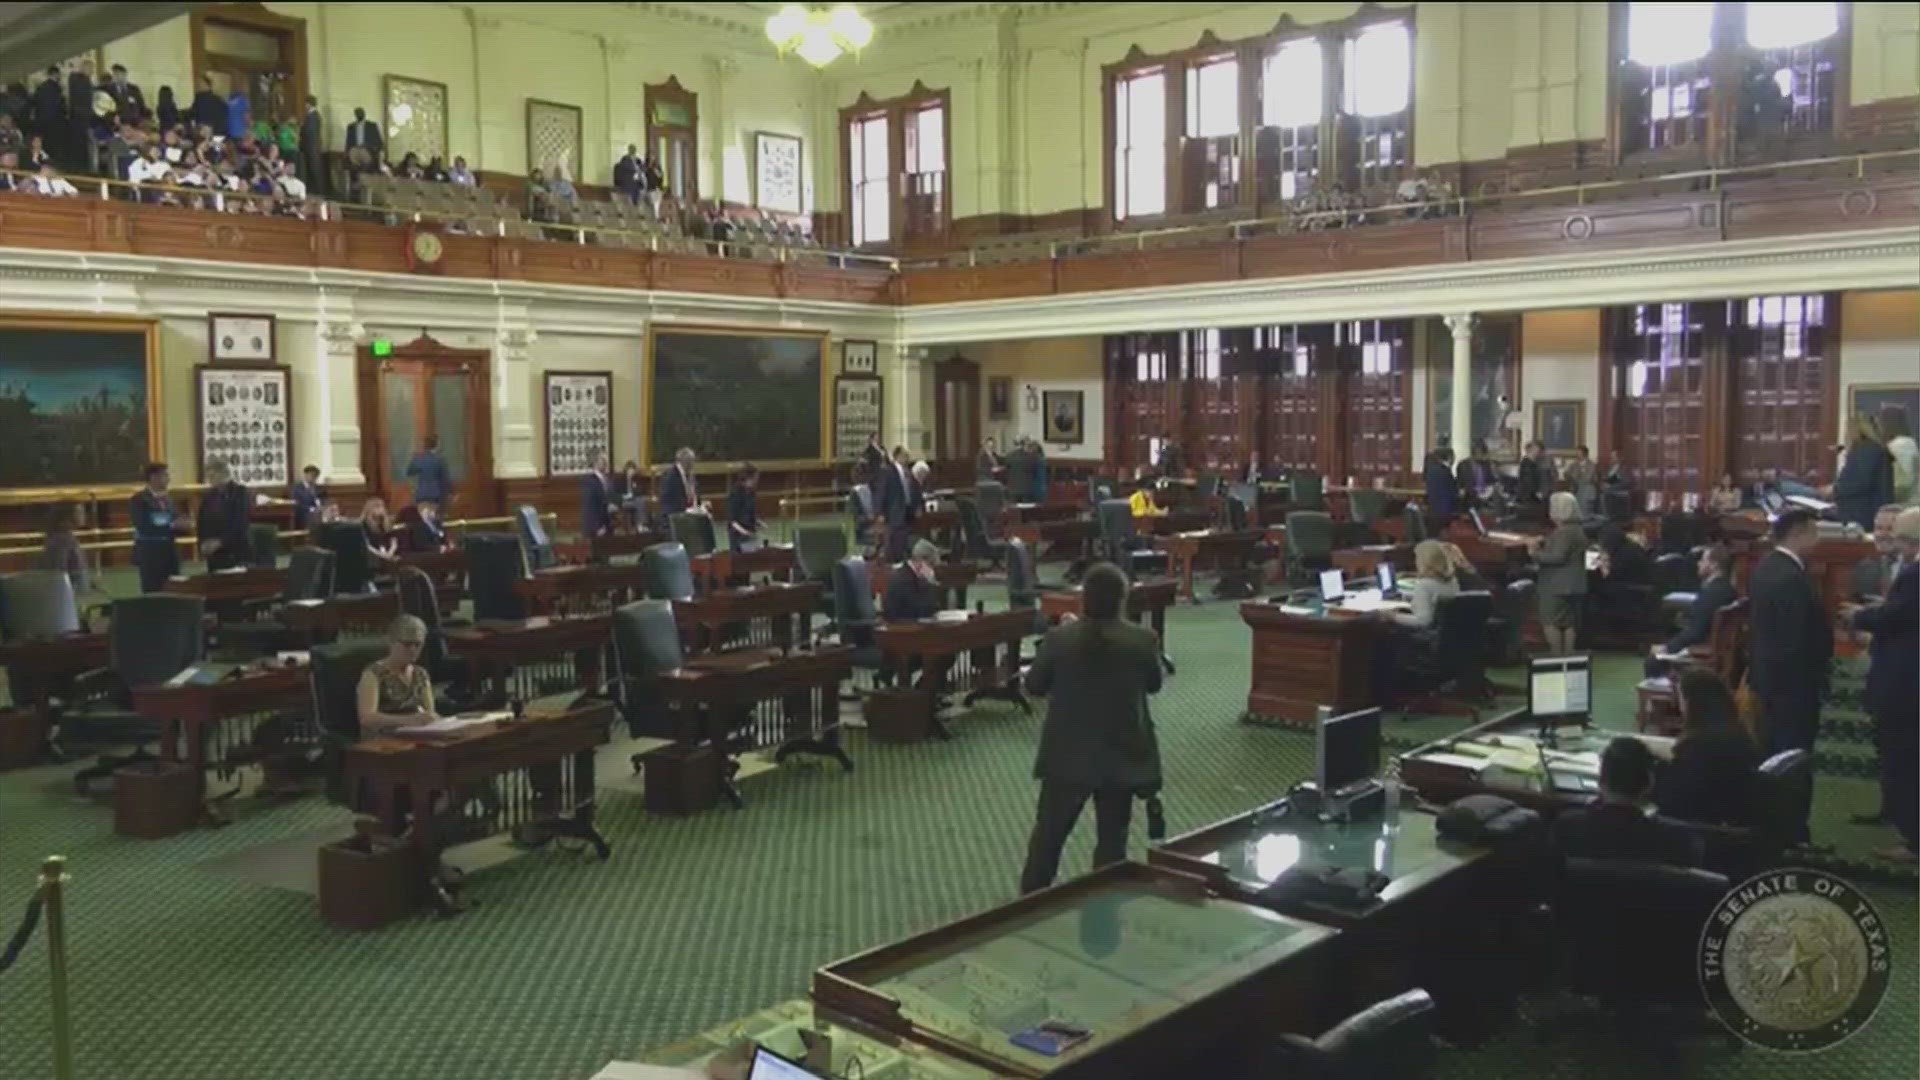 The 60th day of the Texas Legislative session marks the last day to file non-local bills.